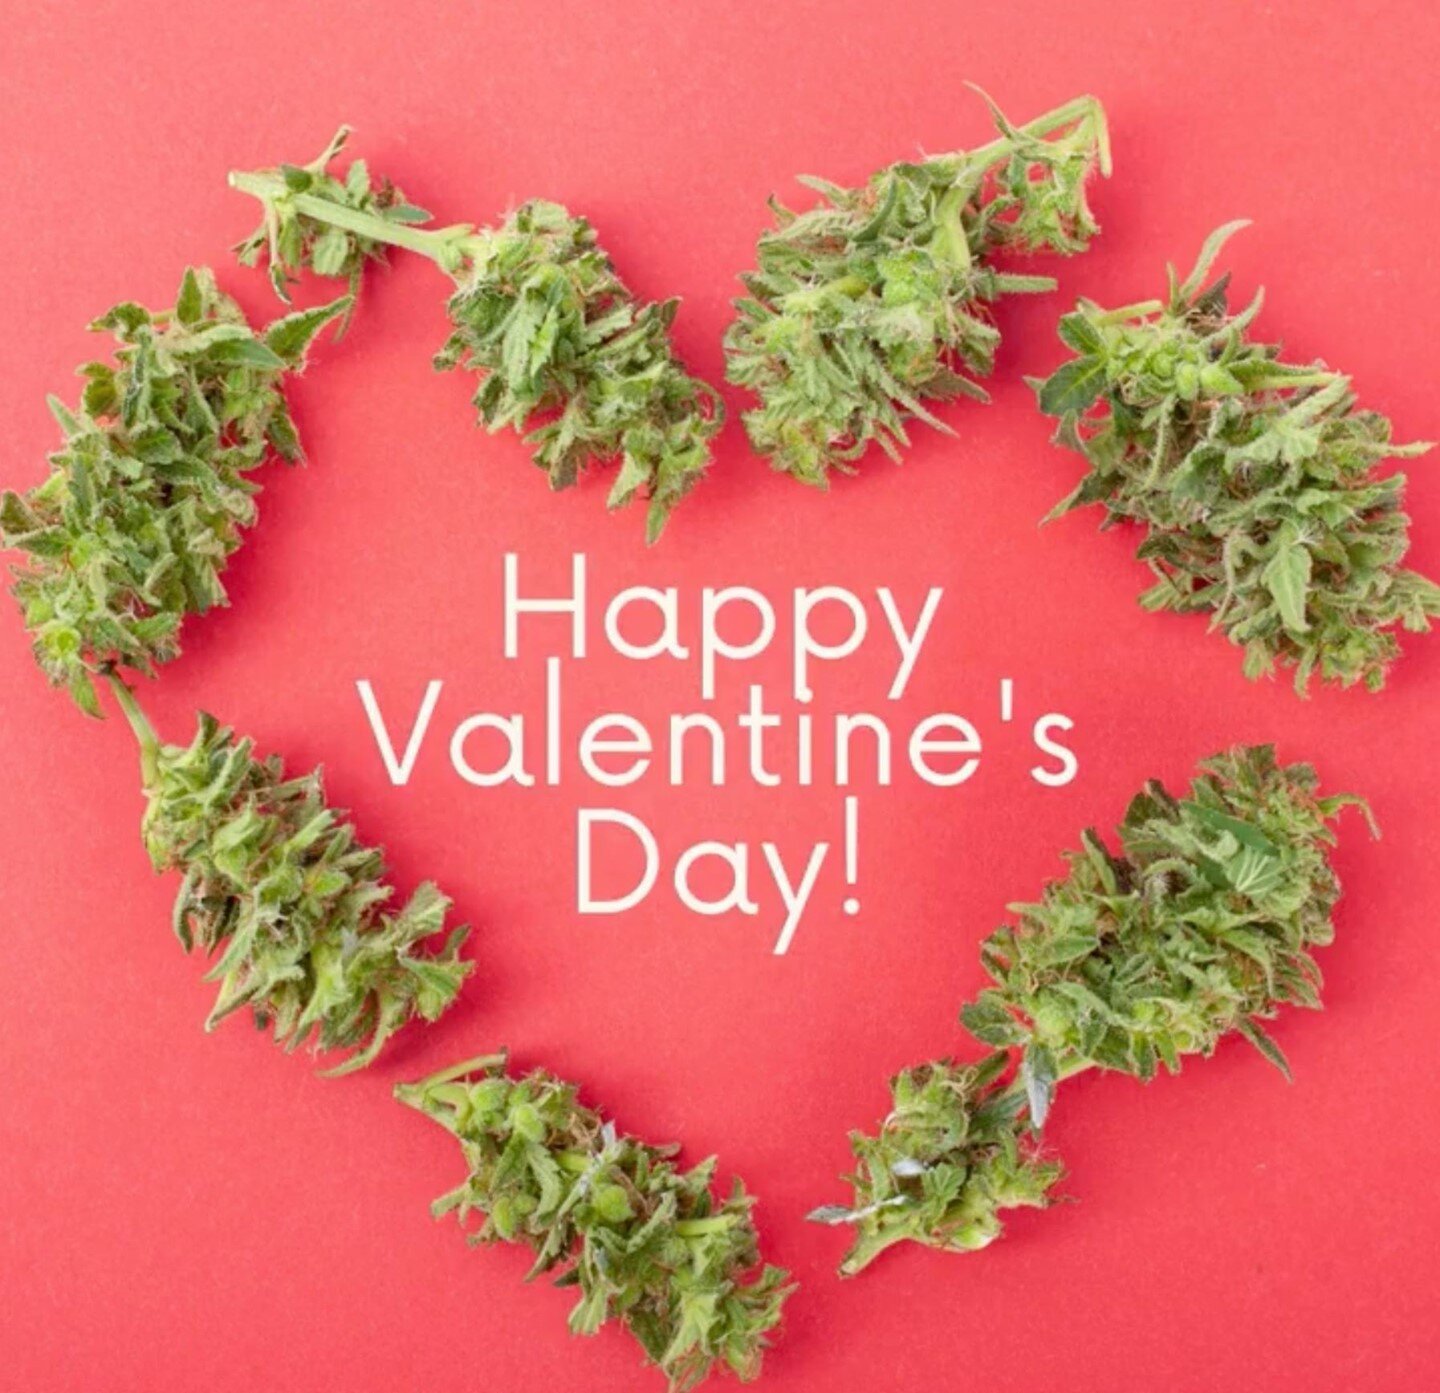 Happy Valentine's Day! Whether you're celebrating alone or with a partner, we hope you take some time to love up on yourself! Self love is indeed your first love. 💚 Oh, and smoke a bowl and journal about it too.

*Nothing for sale.* 

#gohigher #goh